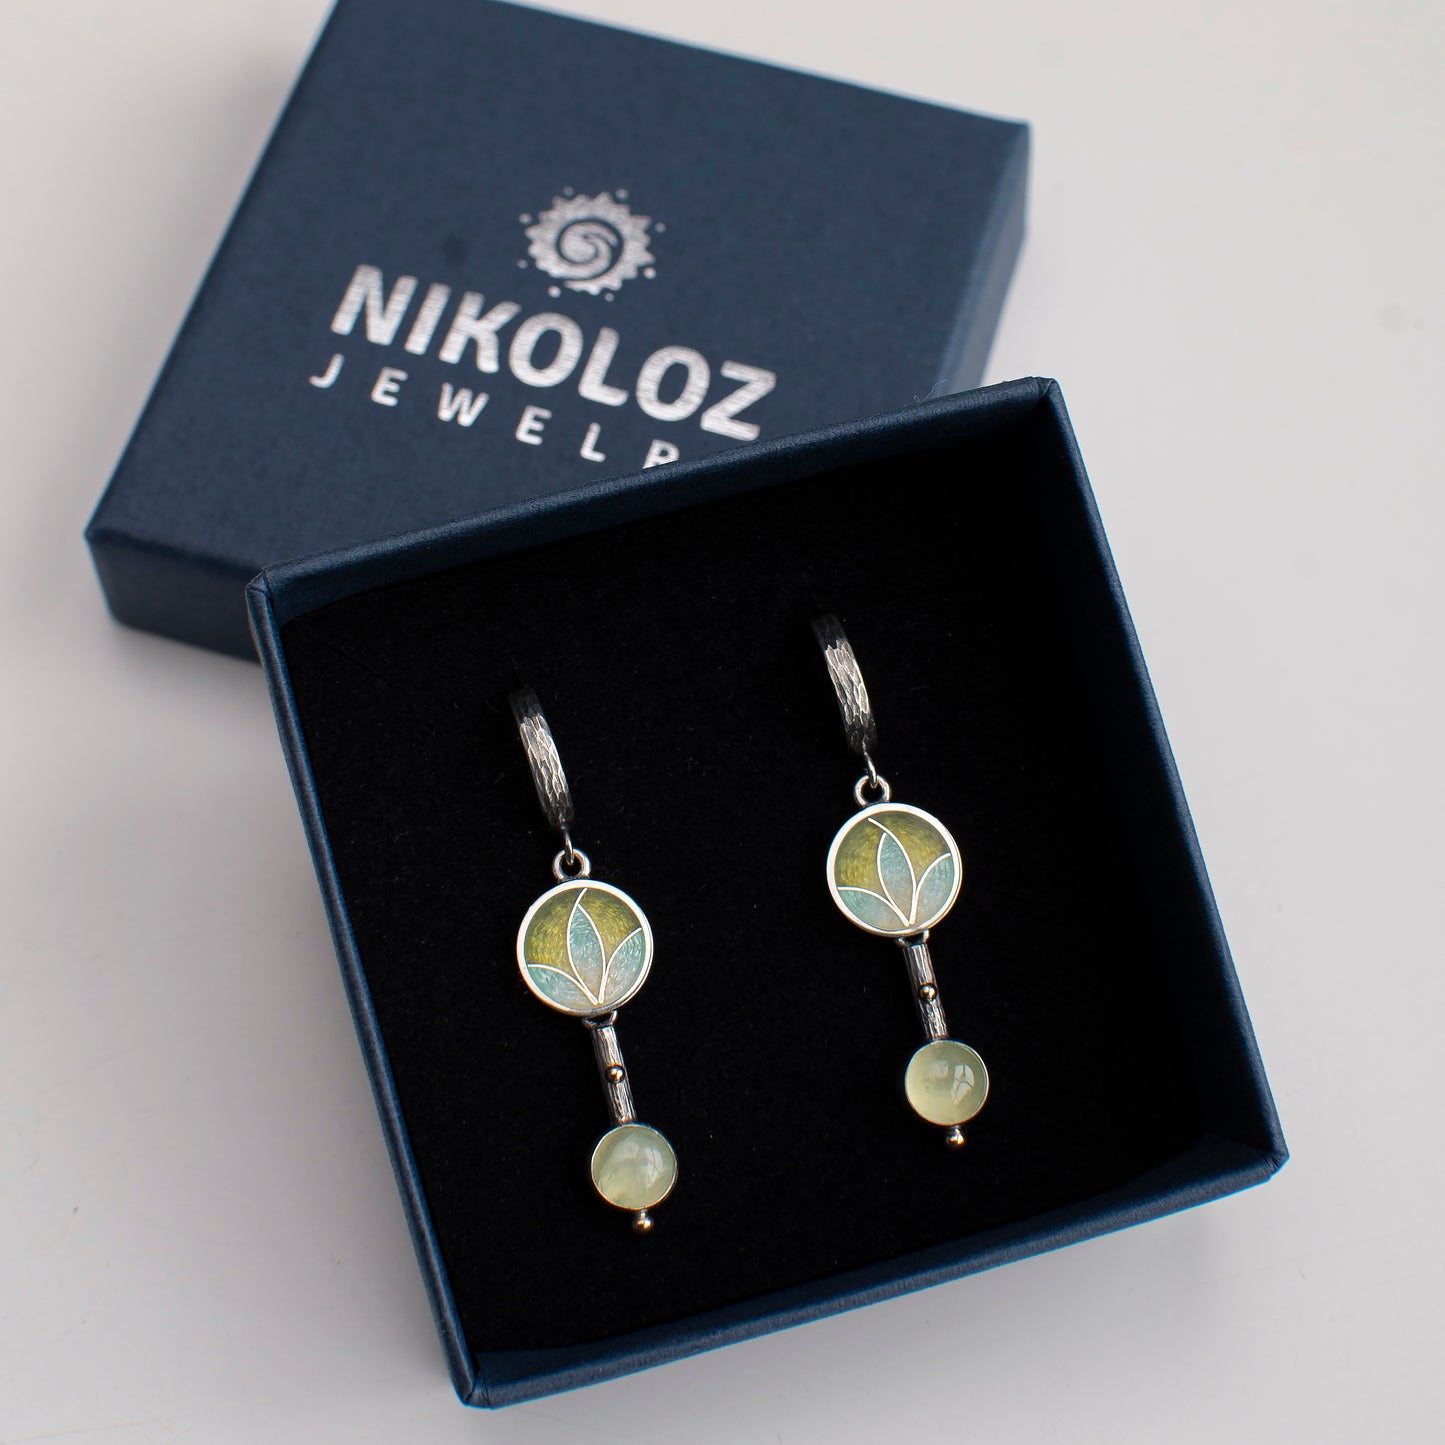 Prehnite Drop Earrings With Gold Beads And Cloisonne Enamel